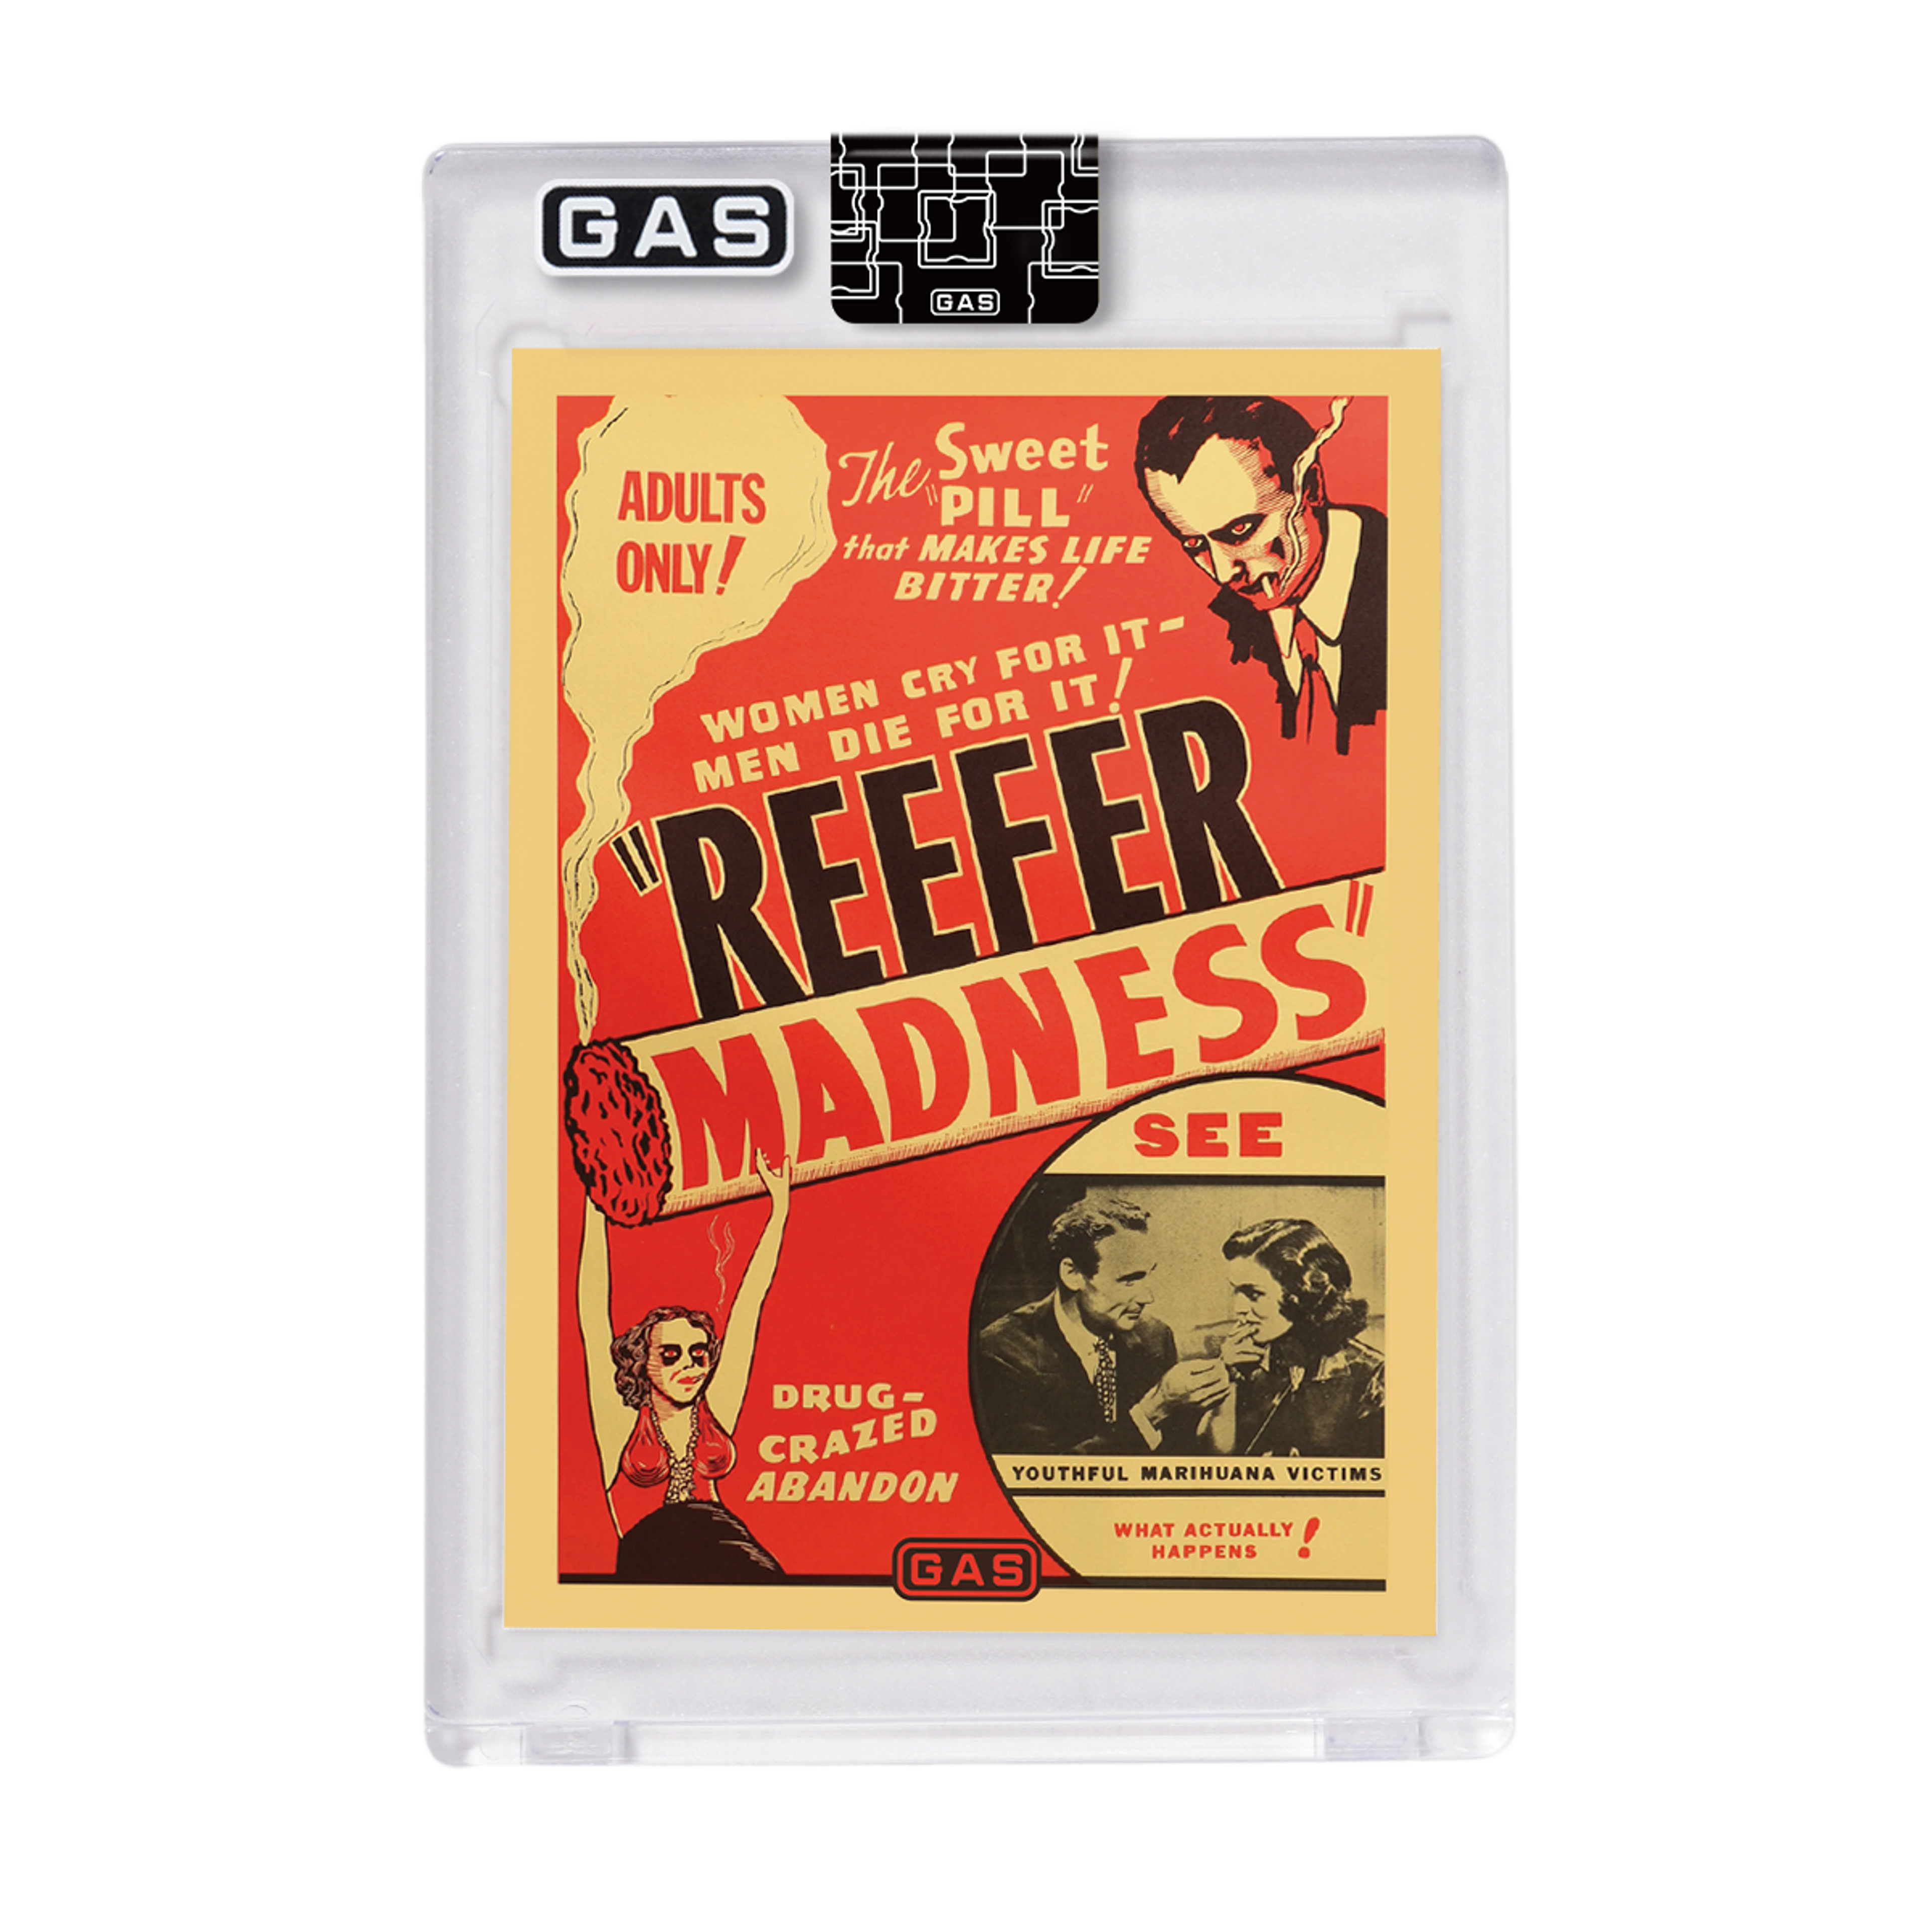 GAS Series 3 #26 Reefer Madness Open Edition Trading Card